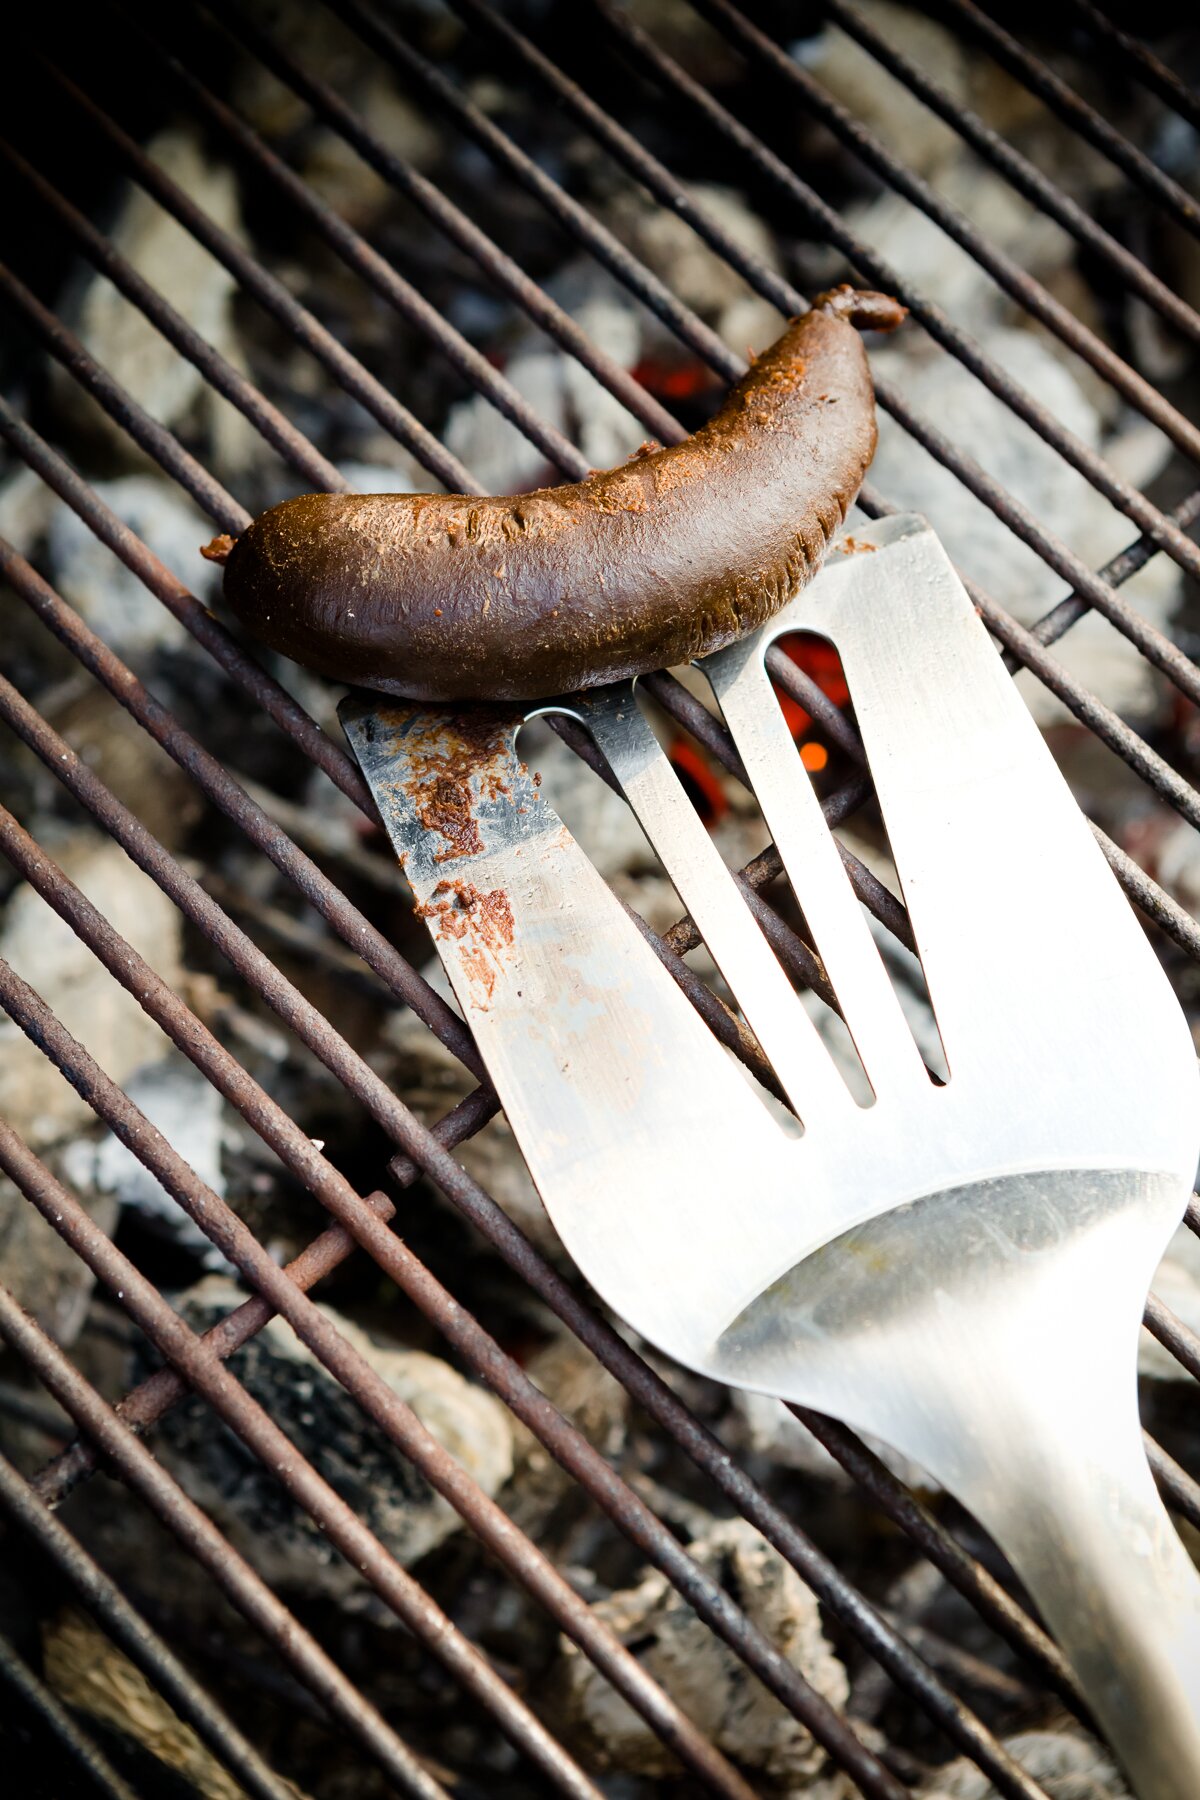 view of a dessert sausage being warmed on a BBQ grill